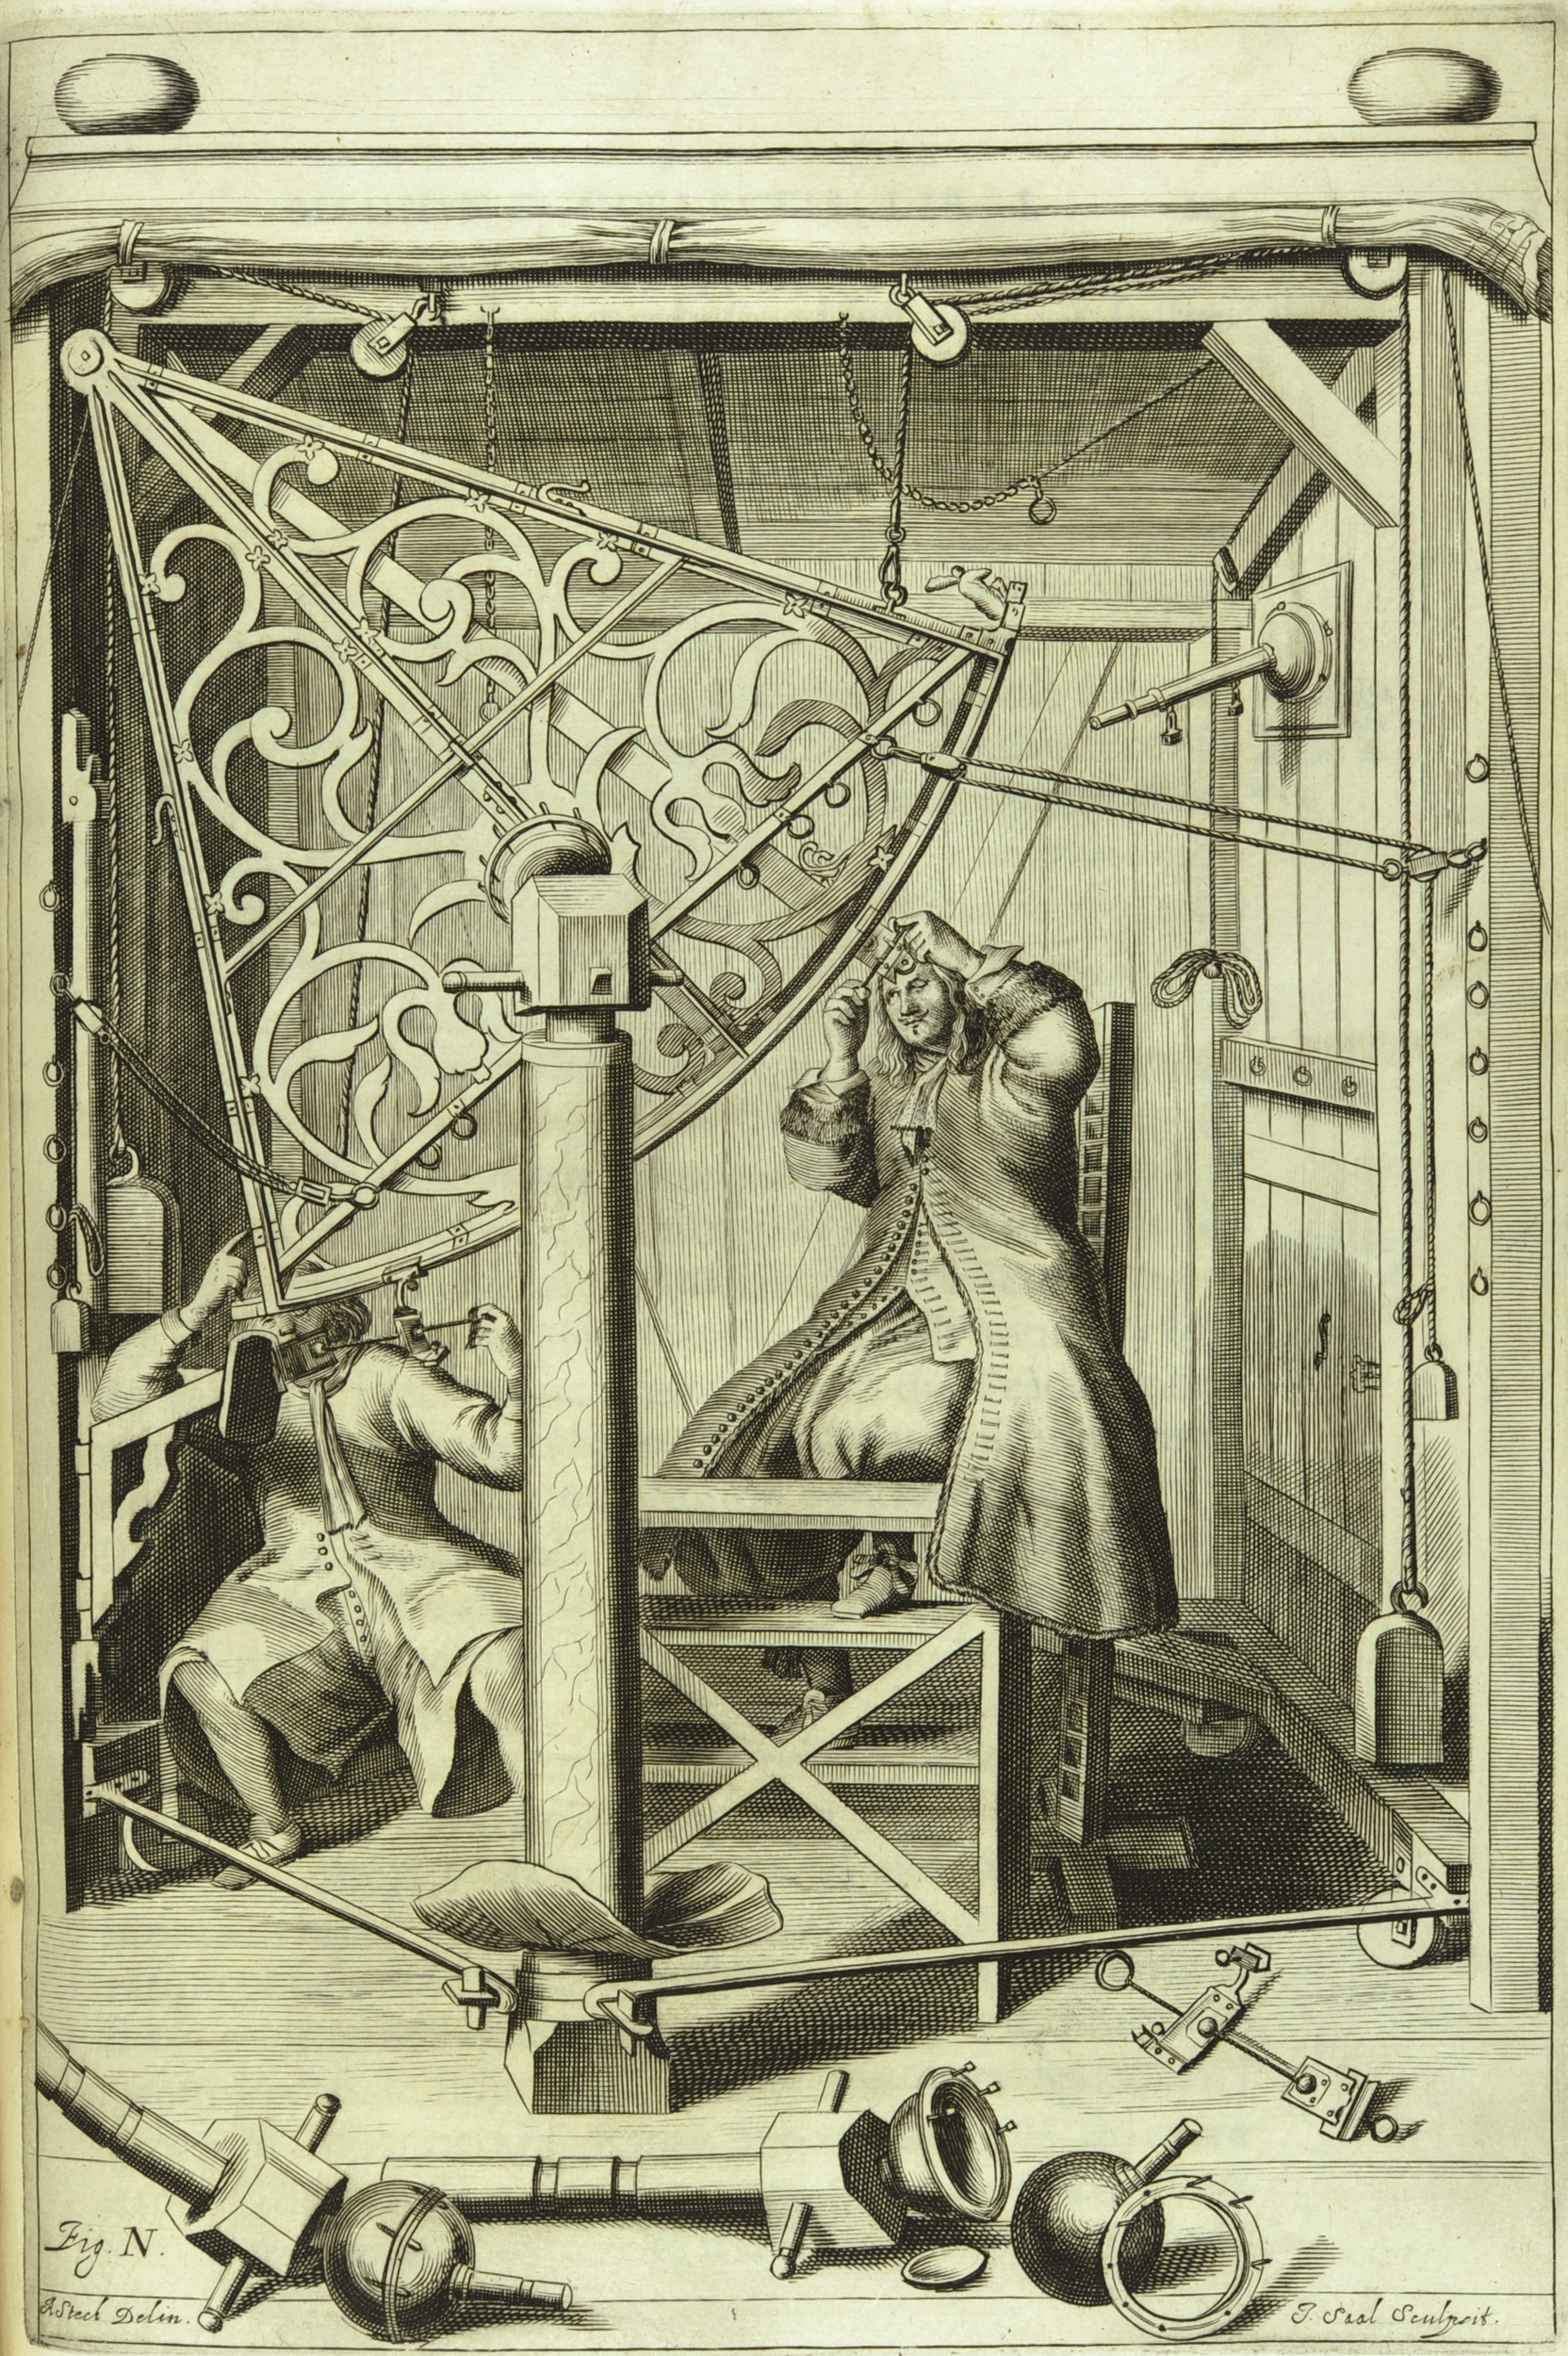 Hevelius hard at work in his observatory (from his Machinae coelestis).